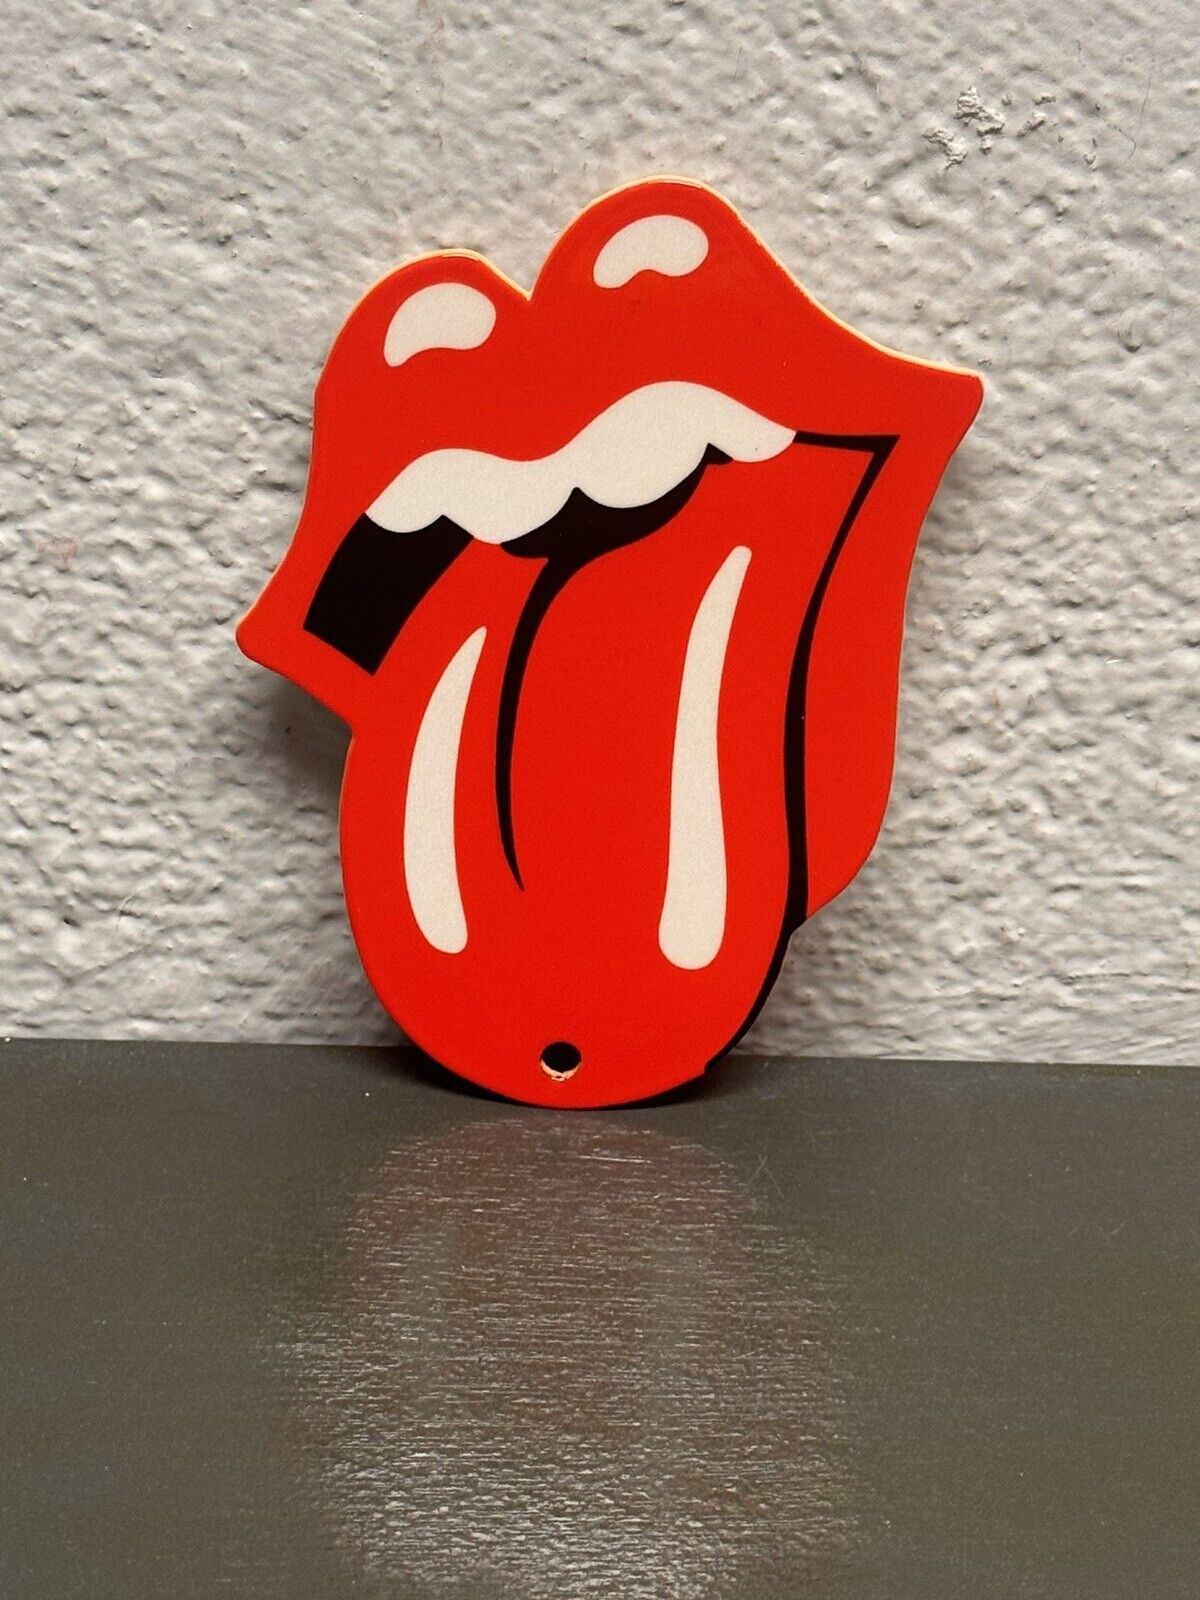 ROLLING STONES Thick Metal Magnet Music Tongue Rock Roll Gas Oil Sign Concert